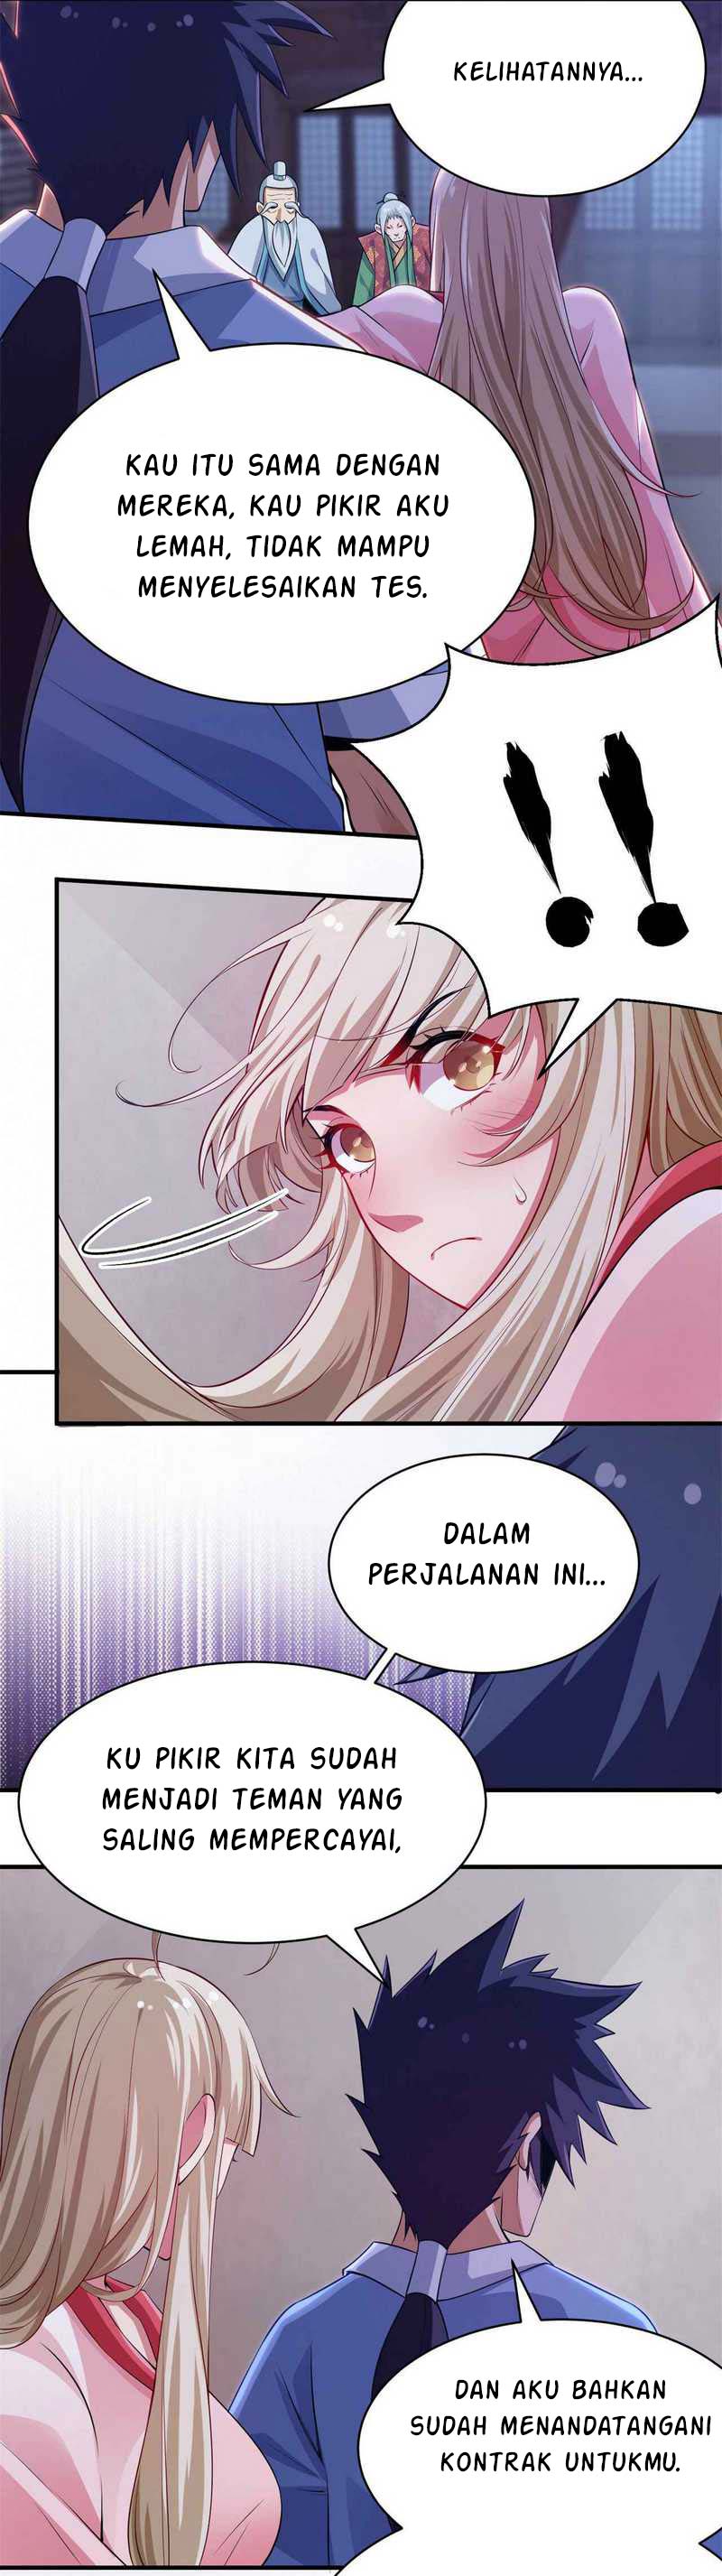 Dilarang COPAS - situs resmi www.mangacanblog.com - Komik i just want to be beaten to death by everyone 010 - chapter 10 11 Indonesia i just want to be beaten to death by everyone 010 - chapter 10 Terbaru 4|Baca Manga Komik Indonesia|Mangacan